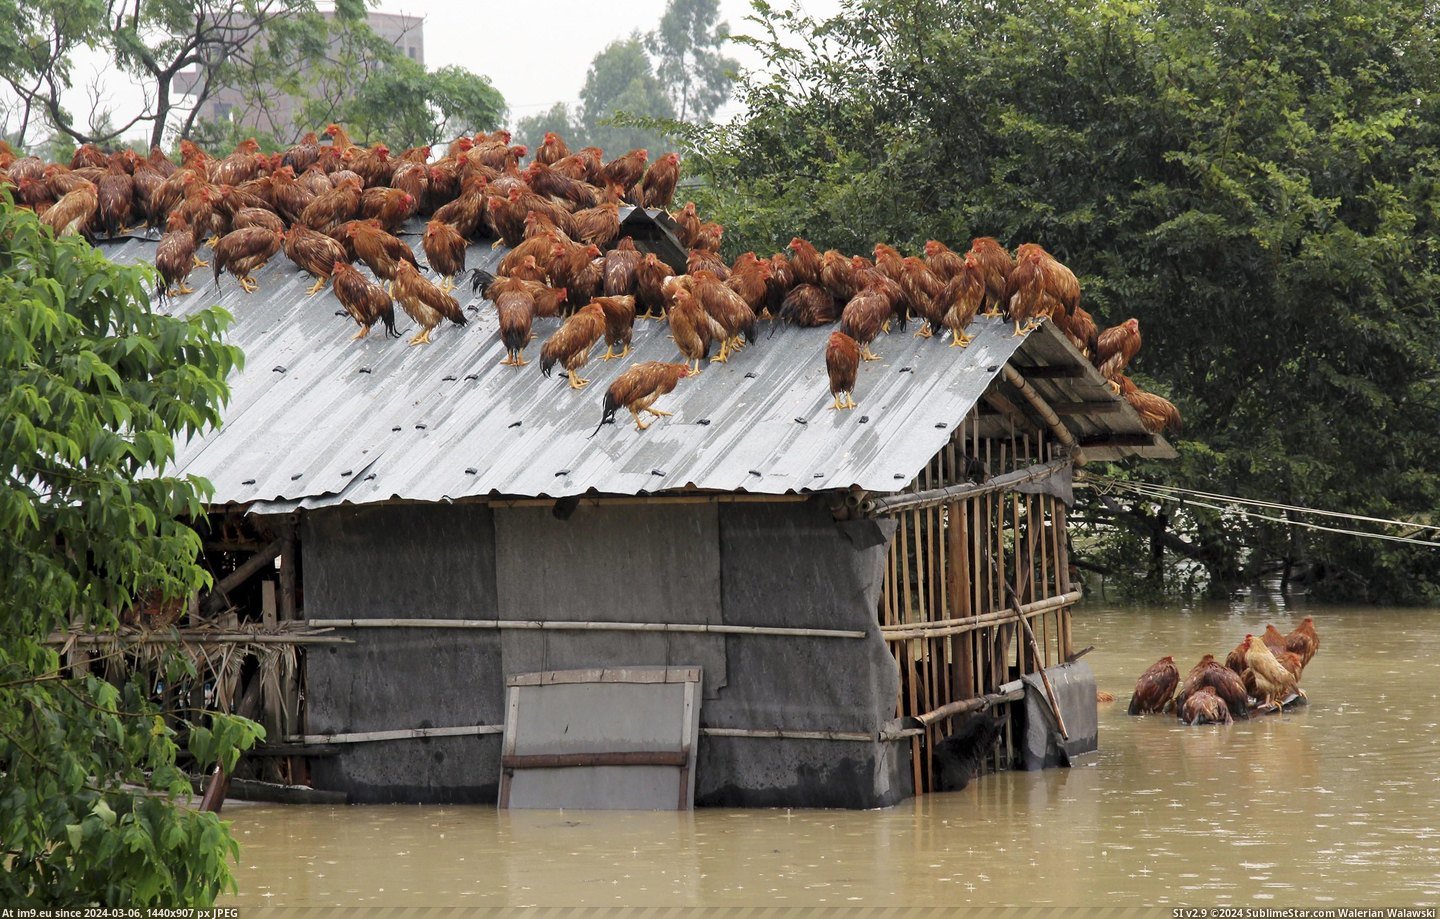 #Roof  #Chickens [Pics] Chickens on the roof Pic. (Bild von album My r/PICS favs))